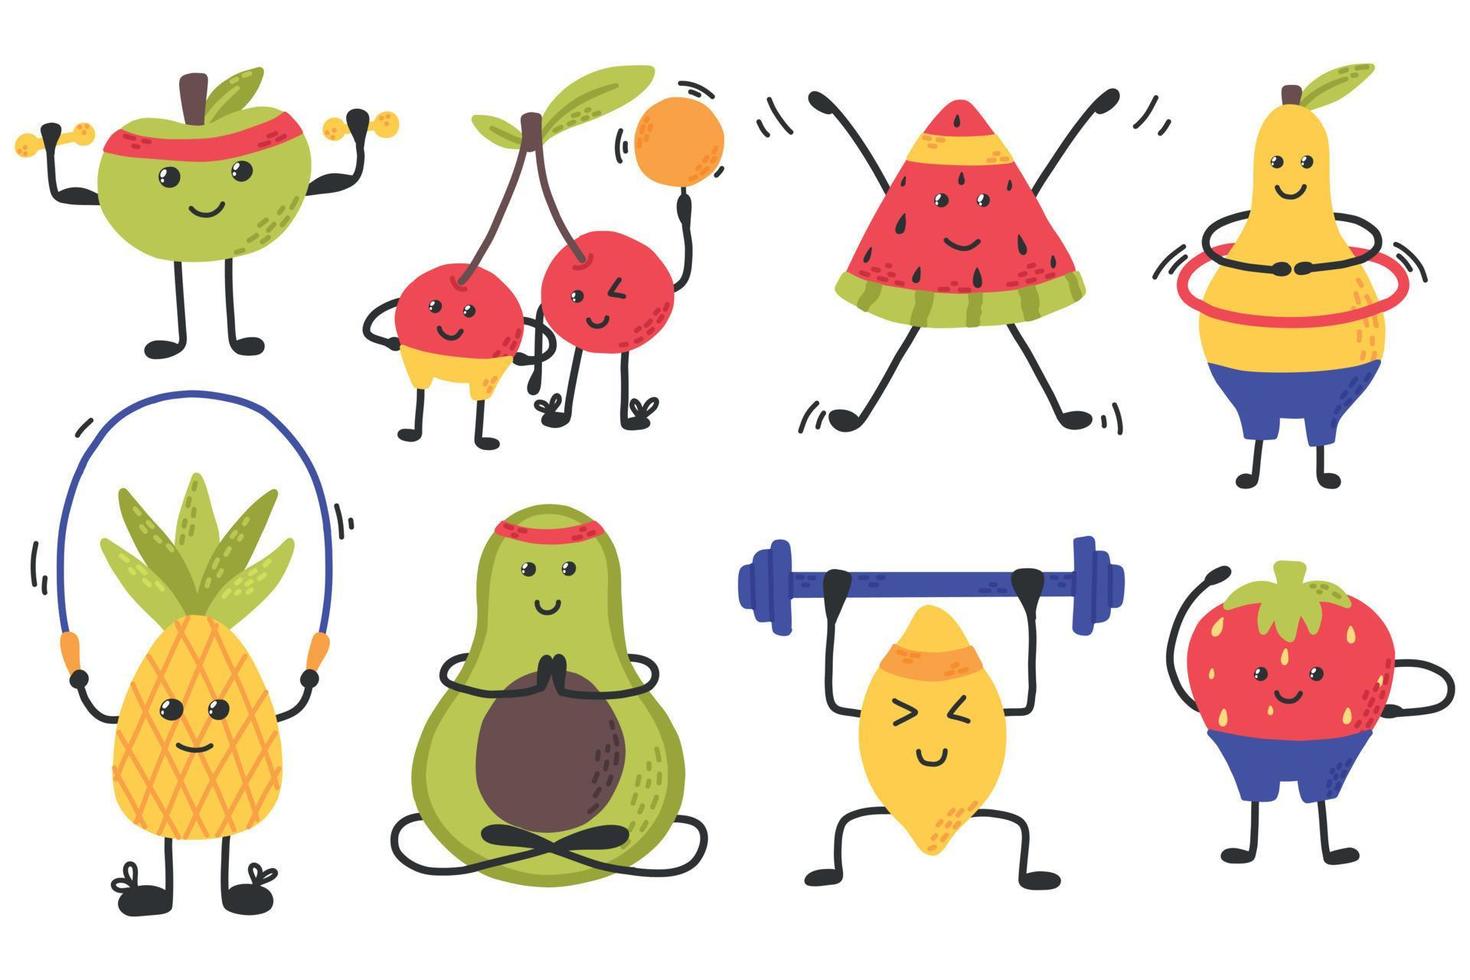 Fruit characters set. Sports characters. Flat style. Vector illustration. Avocado, apple, nananas, lemon, strawberry, pear go in for sports.